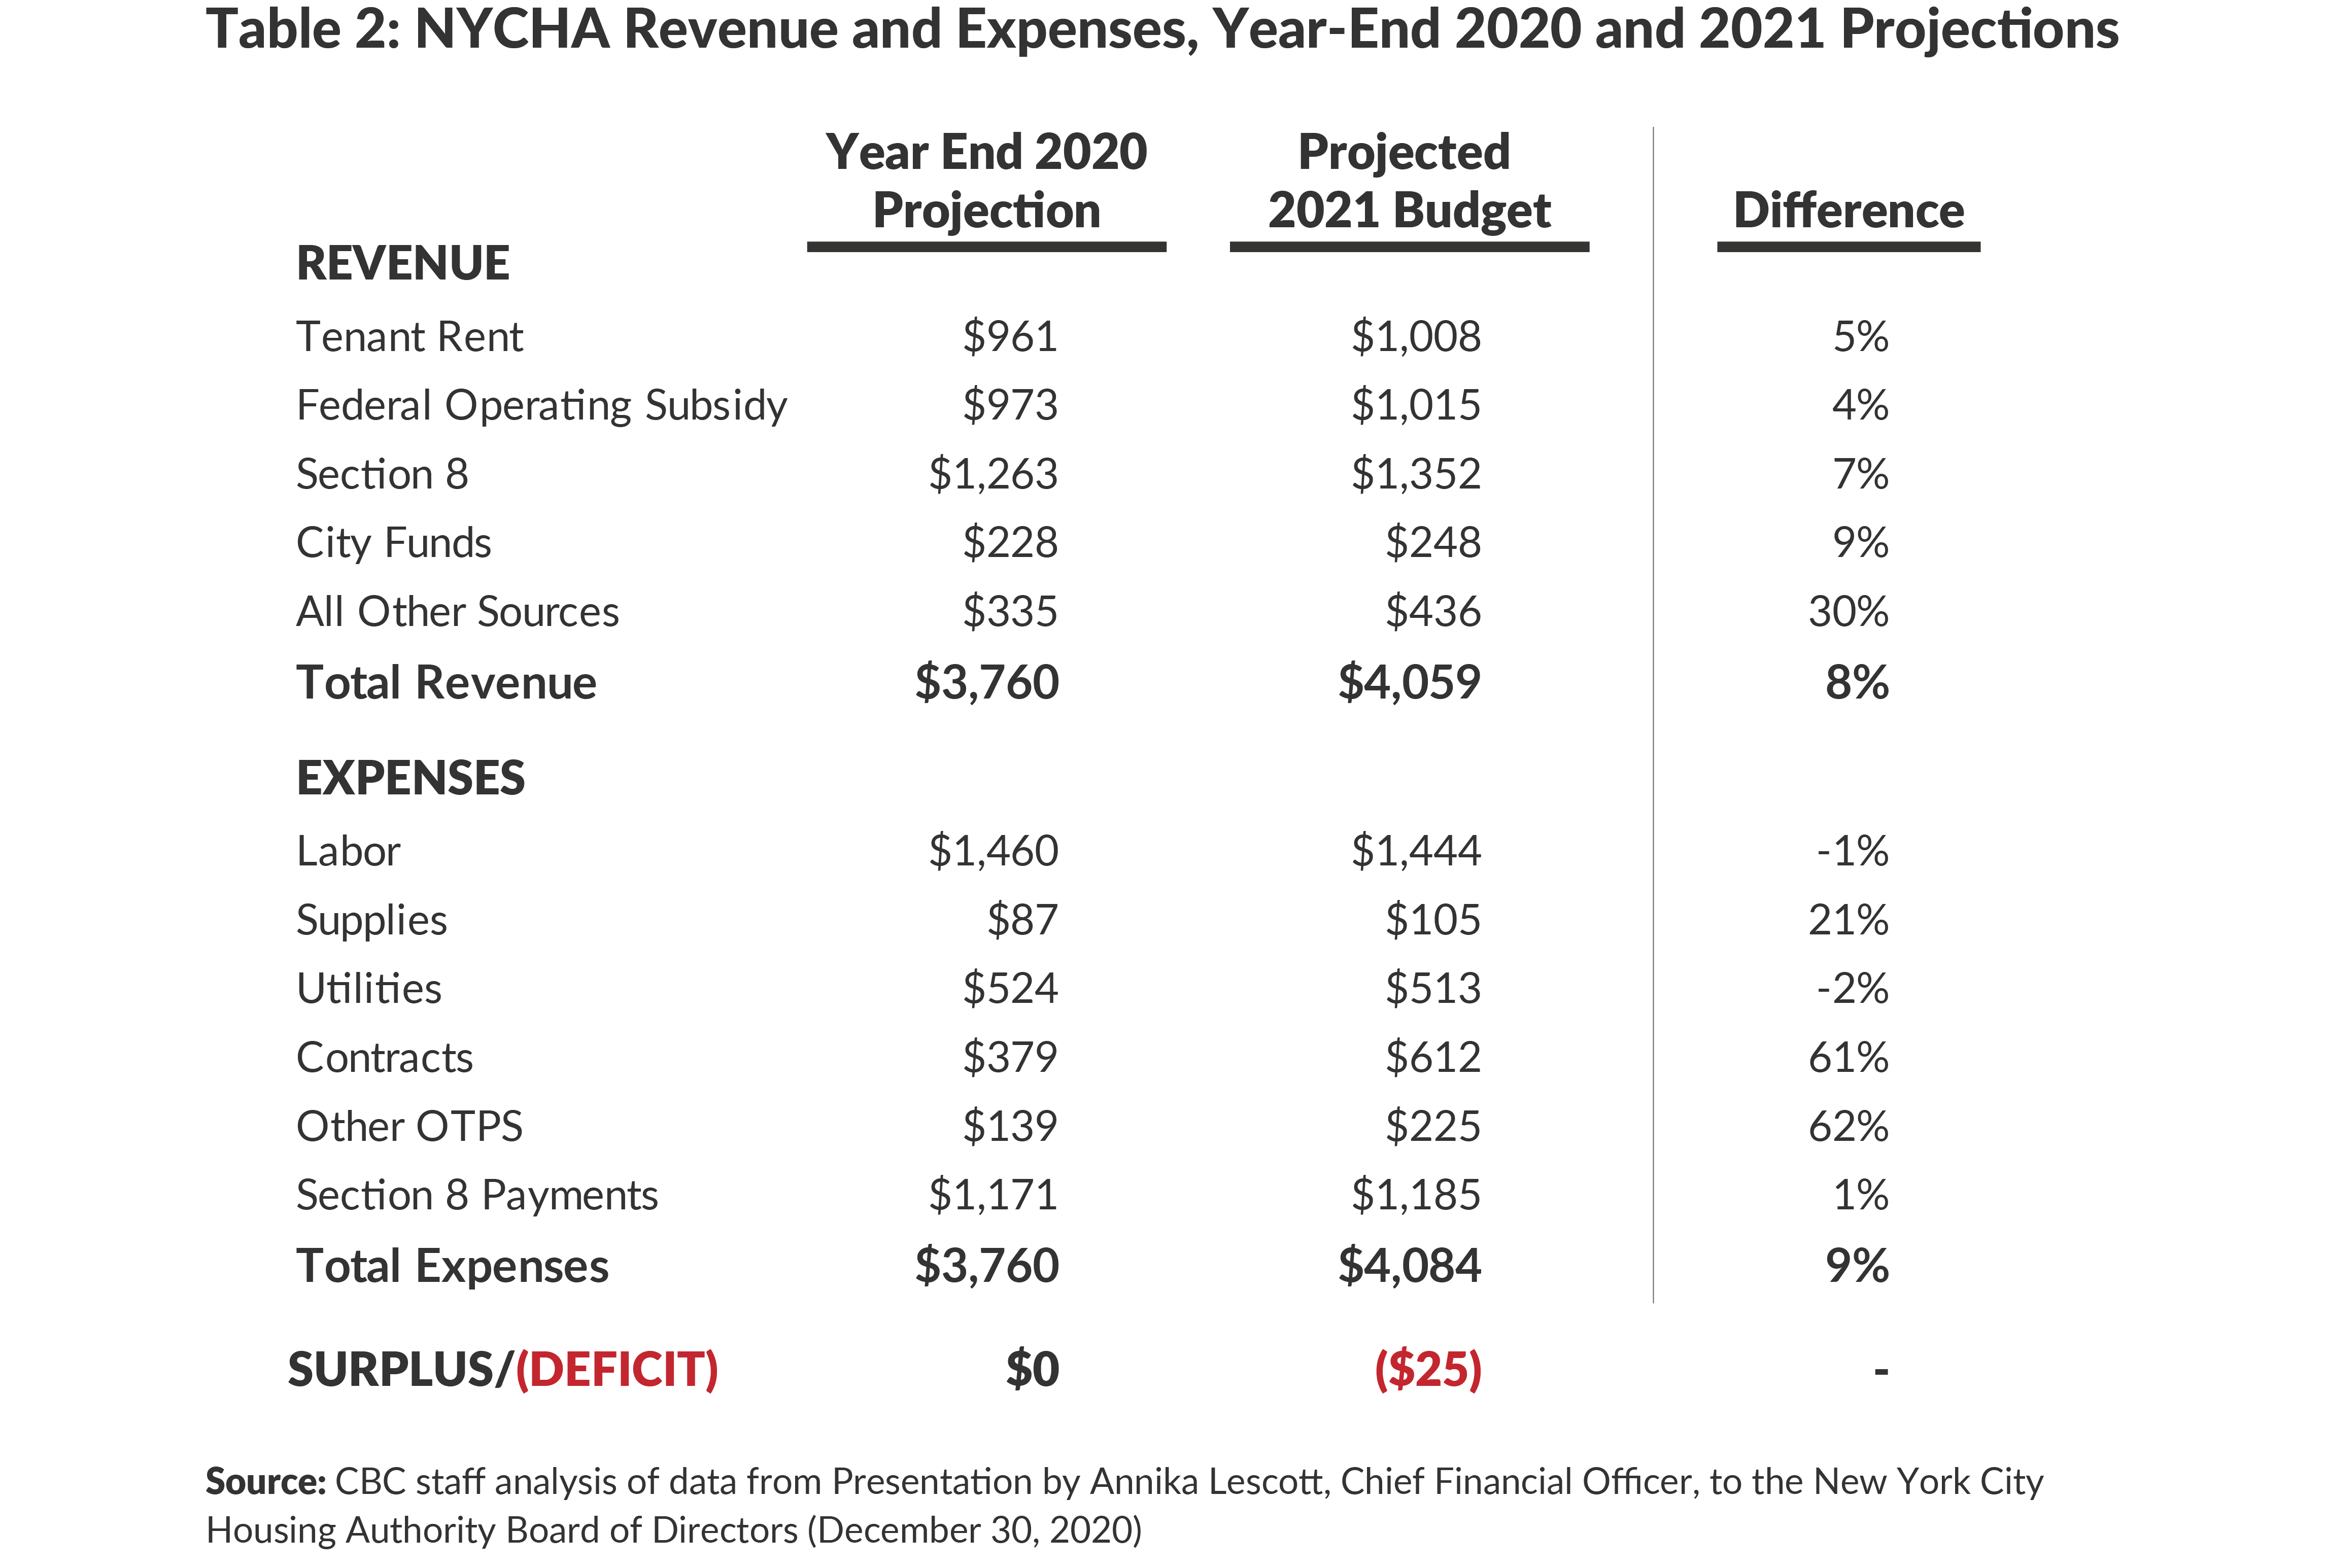 Table 2. NYCHA Revenue and Expenses, Year-End 2020 and 2021 Projections